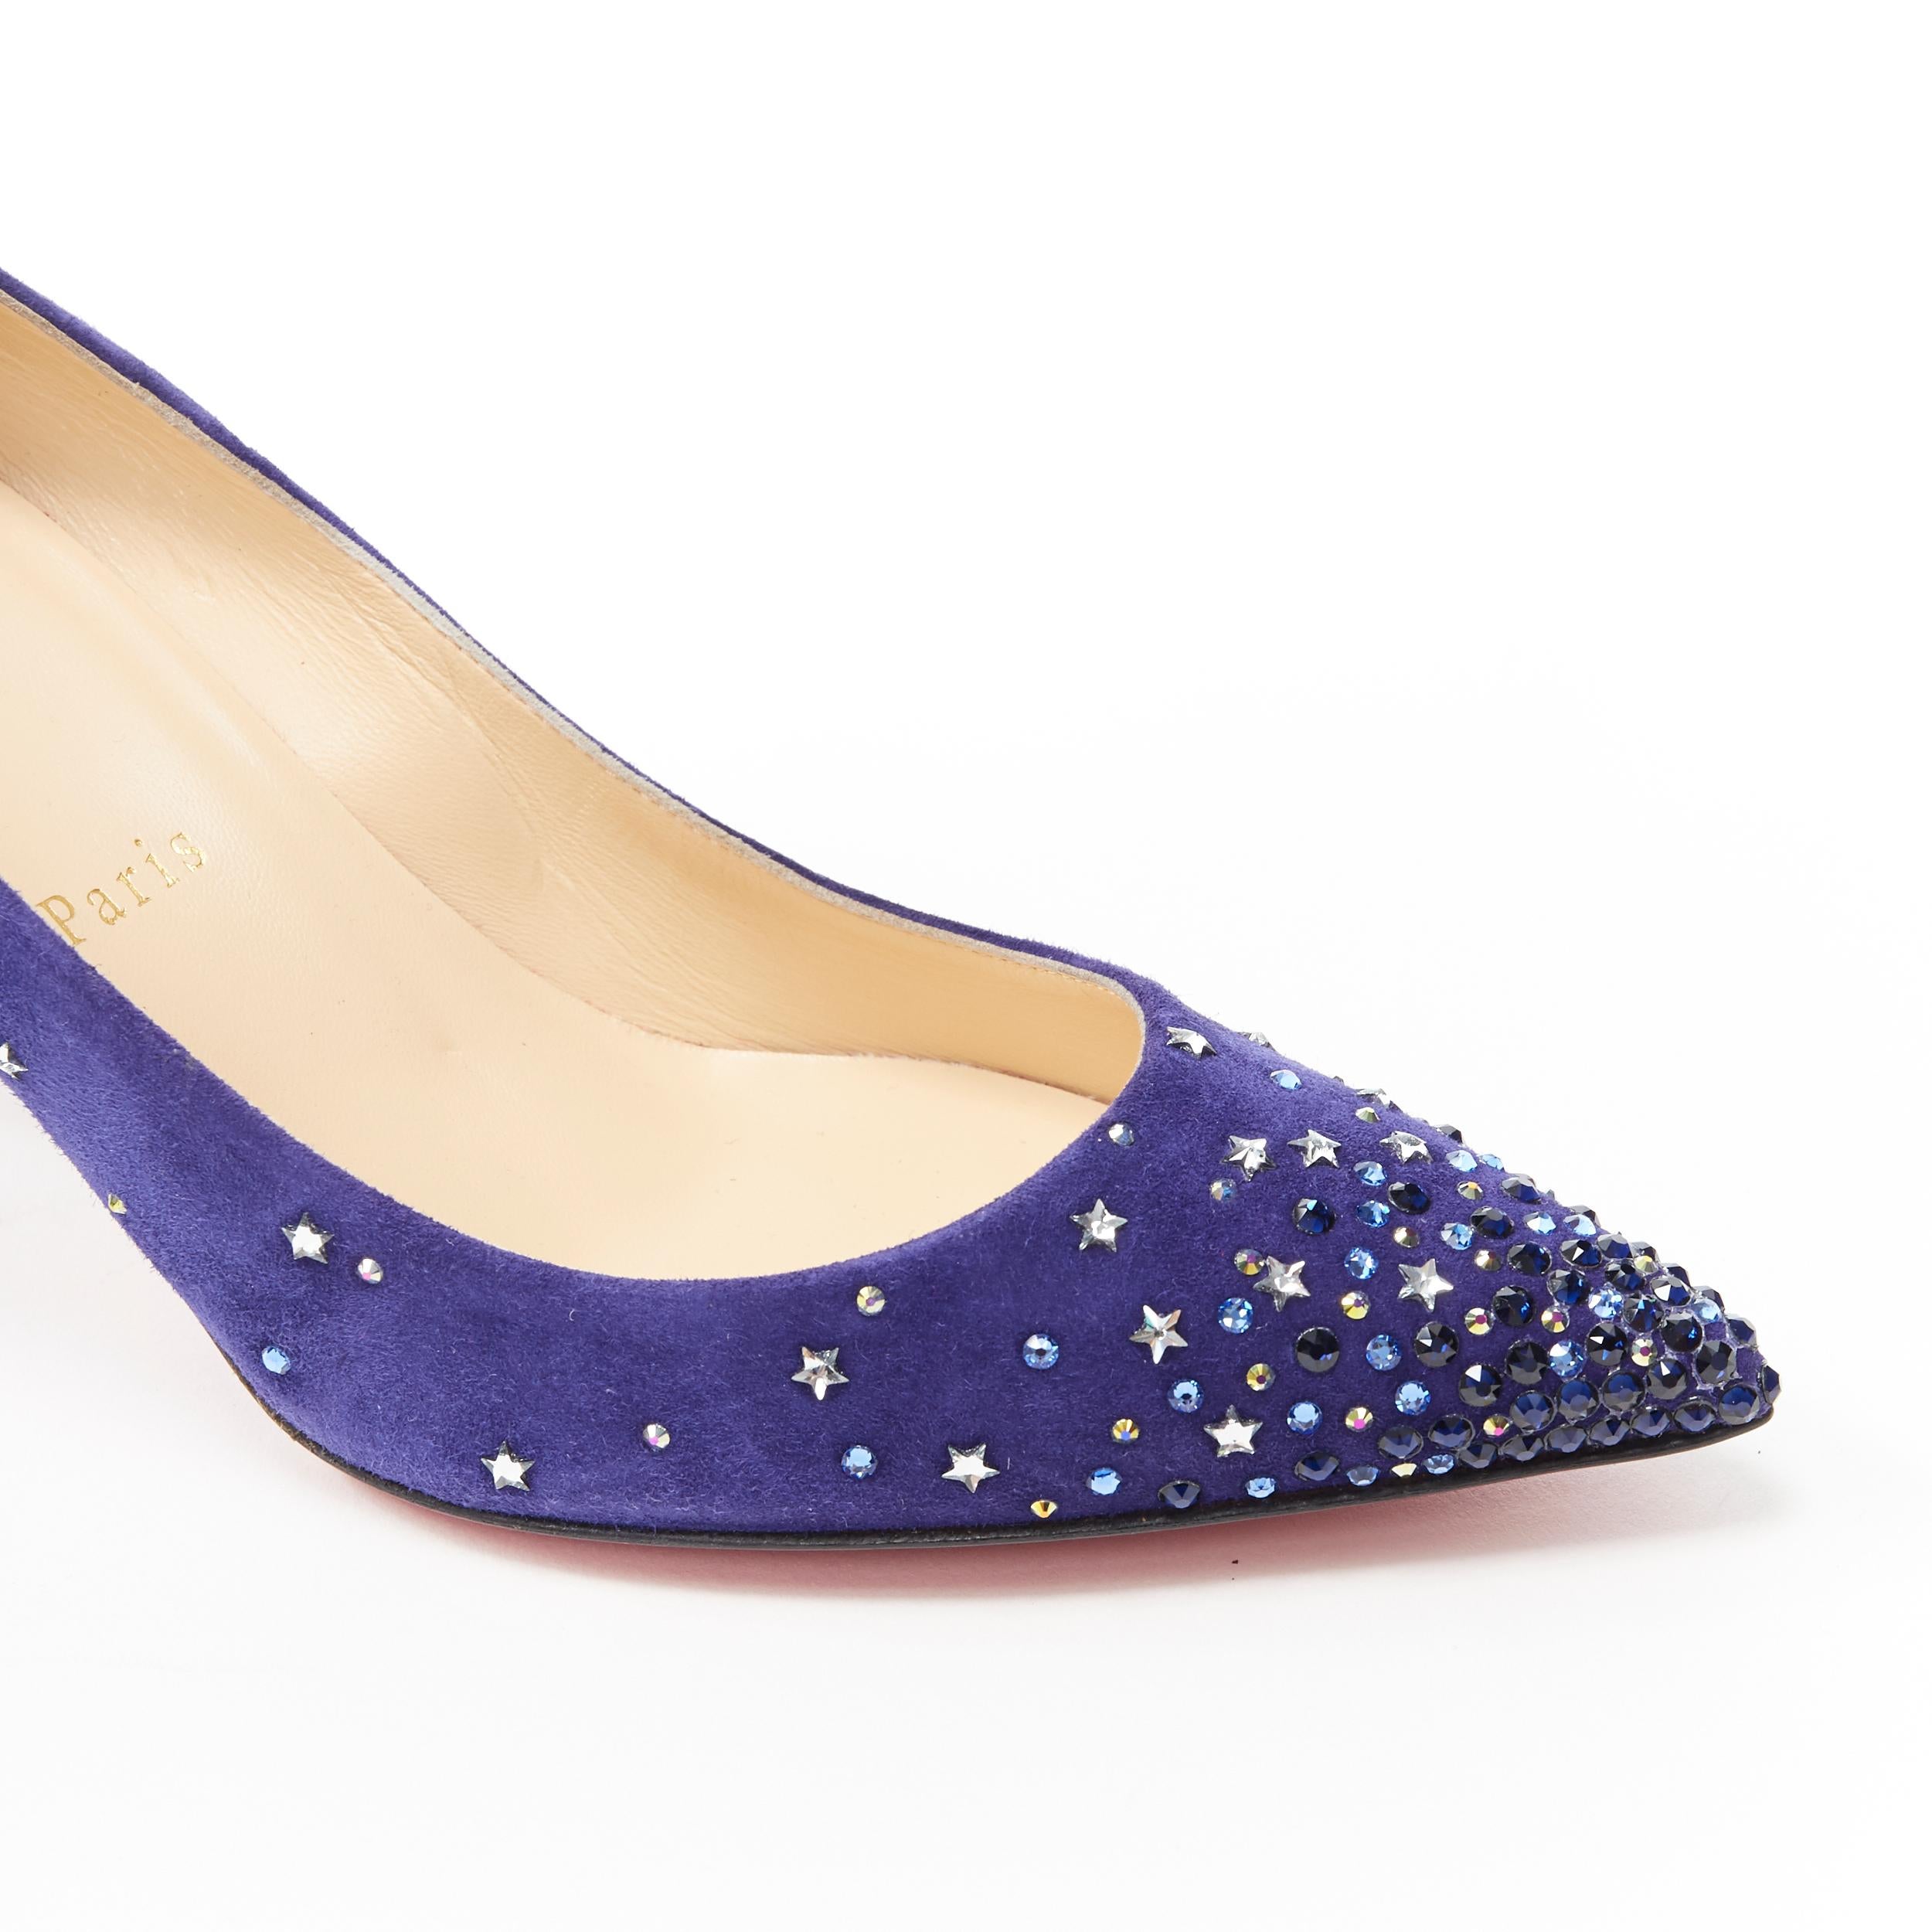 new CHRISTIAN LOUBOUTIN Gravitanita 70 blue suede star strass crystal EU37.5 
Reference: TGAS/A05675 
Brand: Christian Louboutin 
Designer: Christian Louboutin 
Model: Gravitanita 70 
Material: Suede 
Color: Blue 
Pattern: Solid 
Extra Detail: Suede